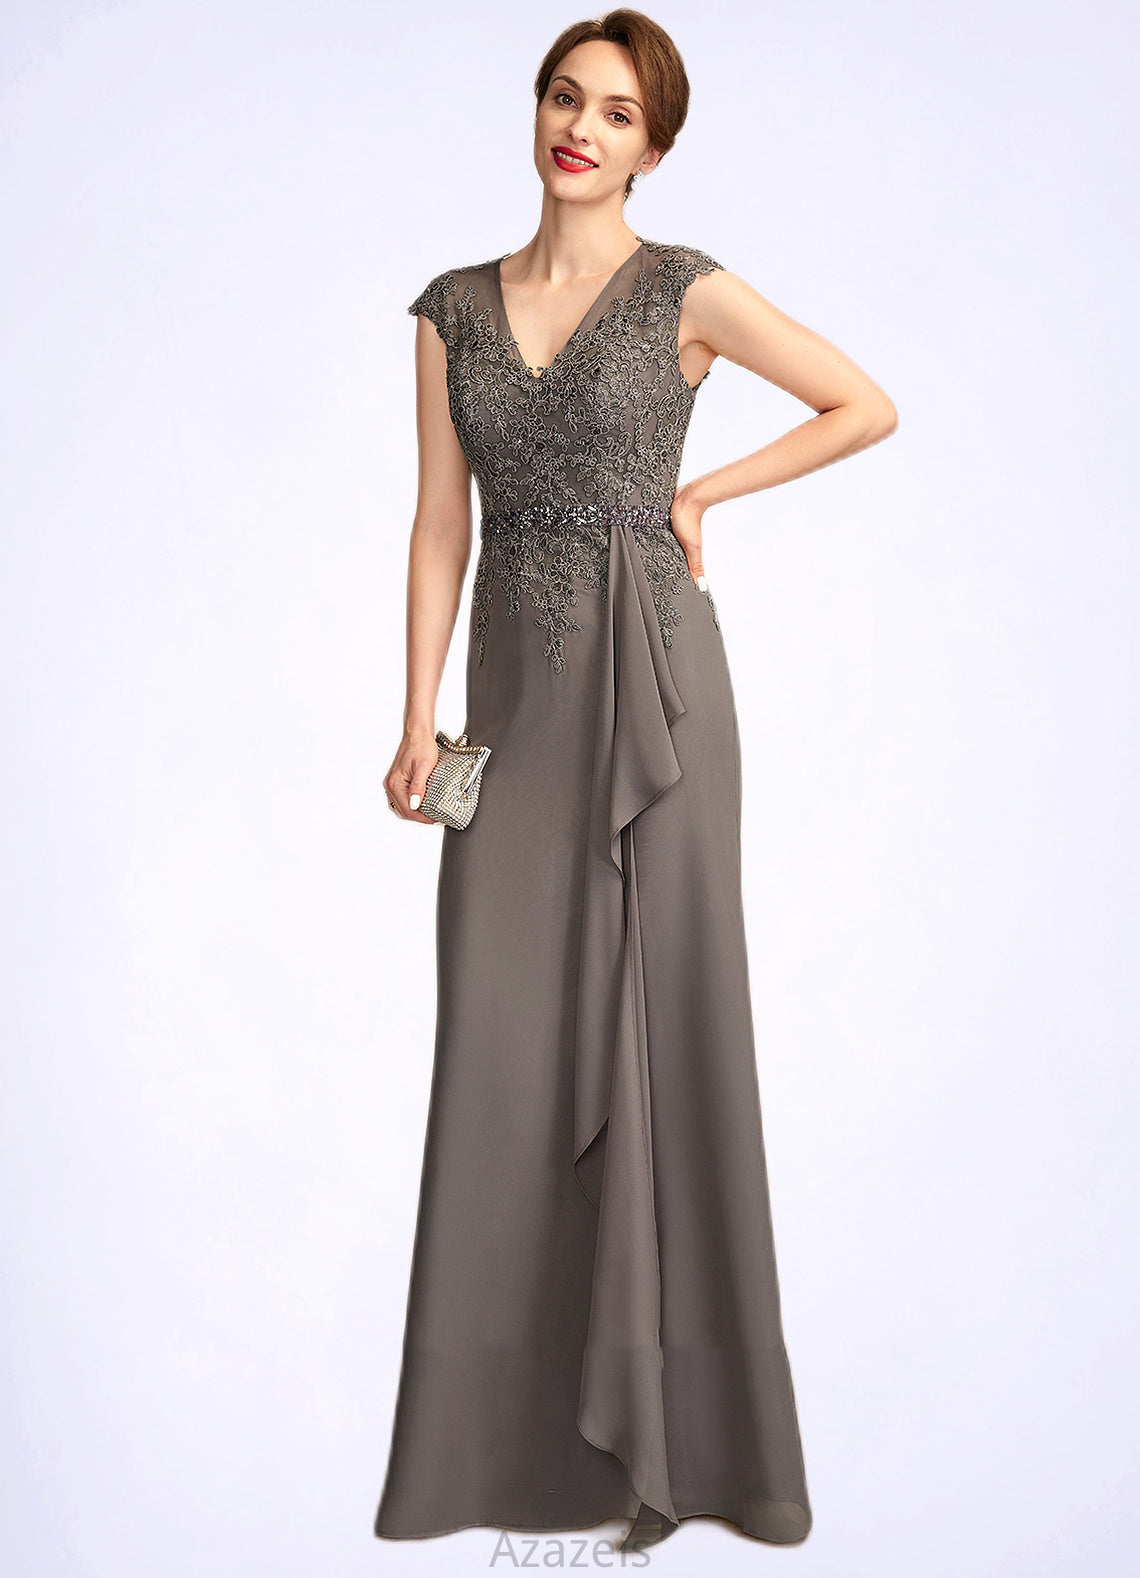 Ruby A-Line V-neck Floor-Length Chiffon Lace Mother of the Bride Dress With Beading Sequins Cascading Ruffles DF126P0015030